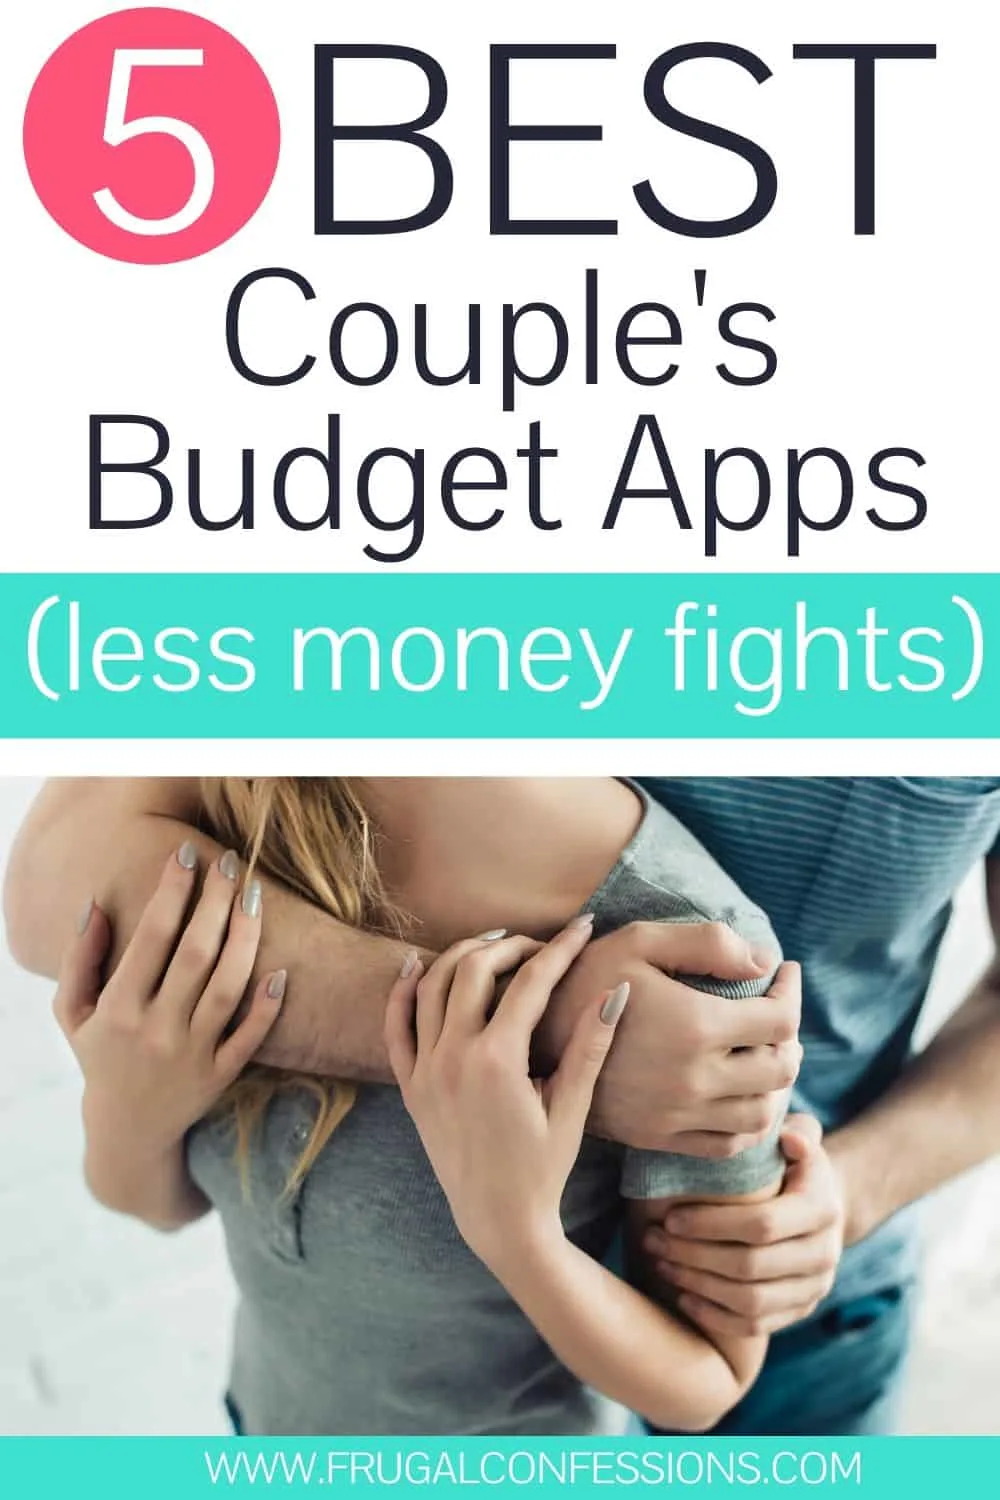 couple with arms around each other, text overlay 